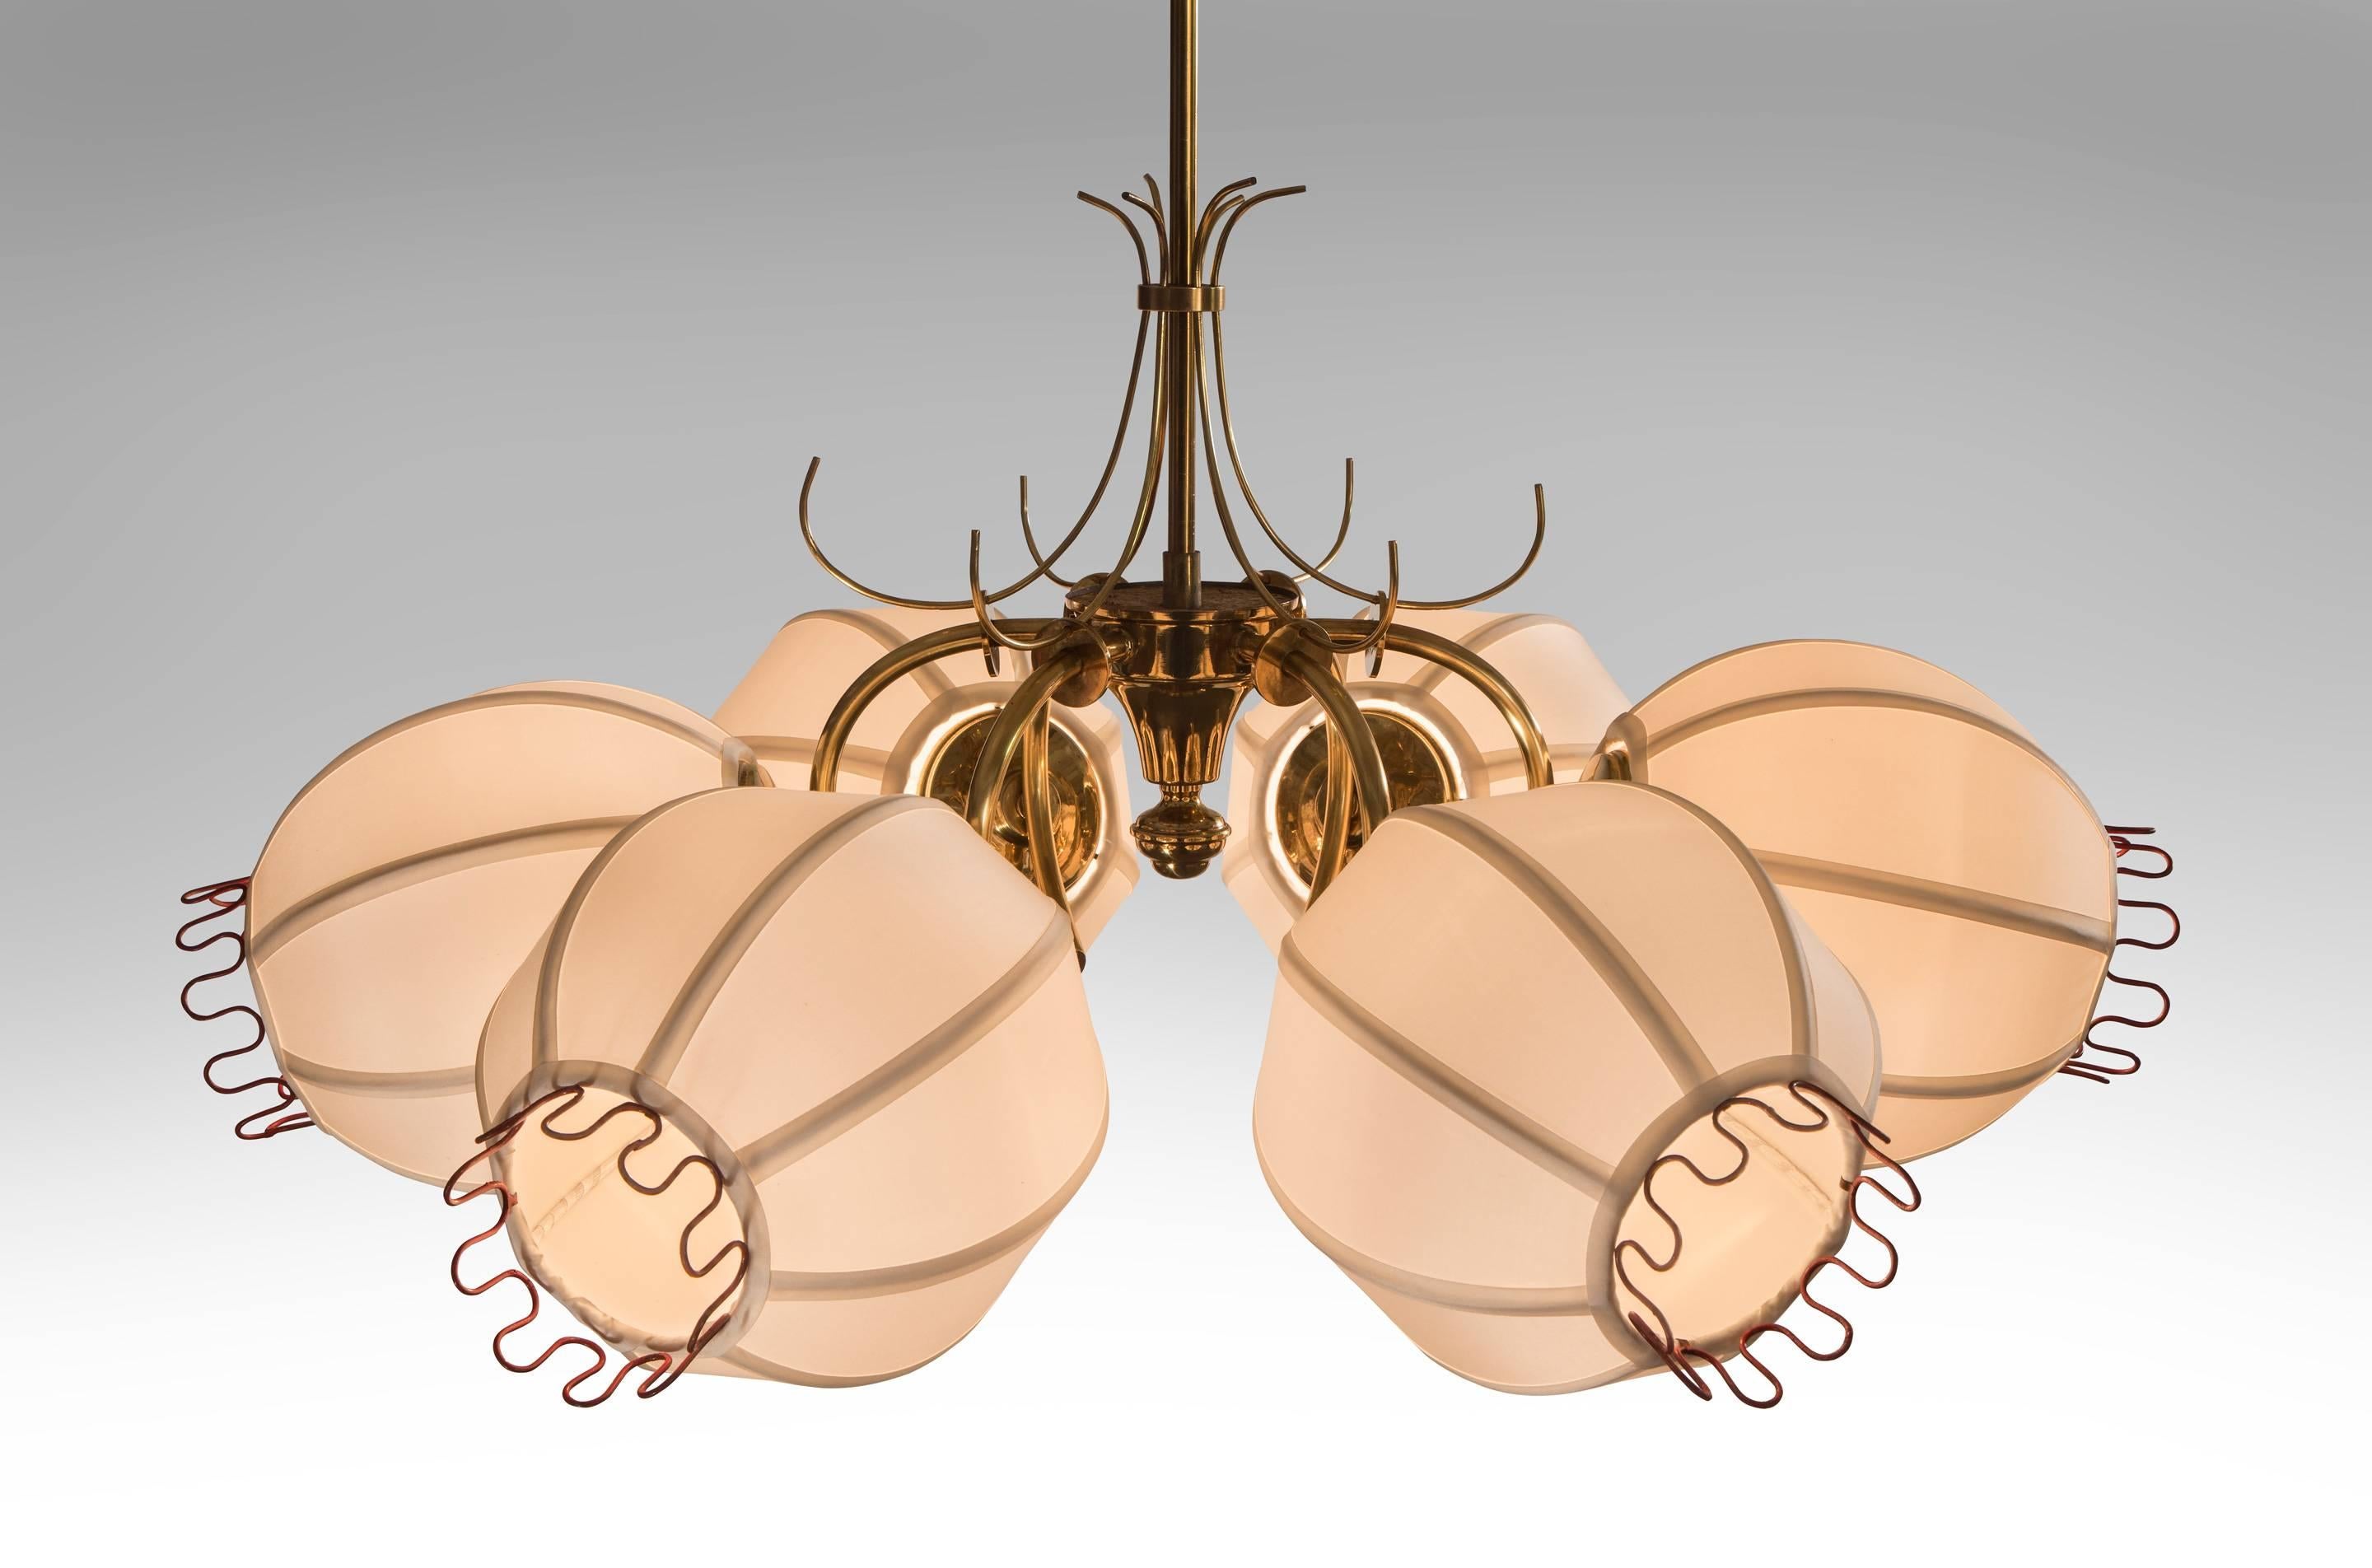 An imaginatively inventive chandelier. The brass canopy, above a hanging rod centering a conical body, issuing six c-curved arms, each arm supporting a spherical silk shade terminating with undulating red wire. 

The height is easily adjustable.